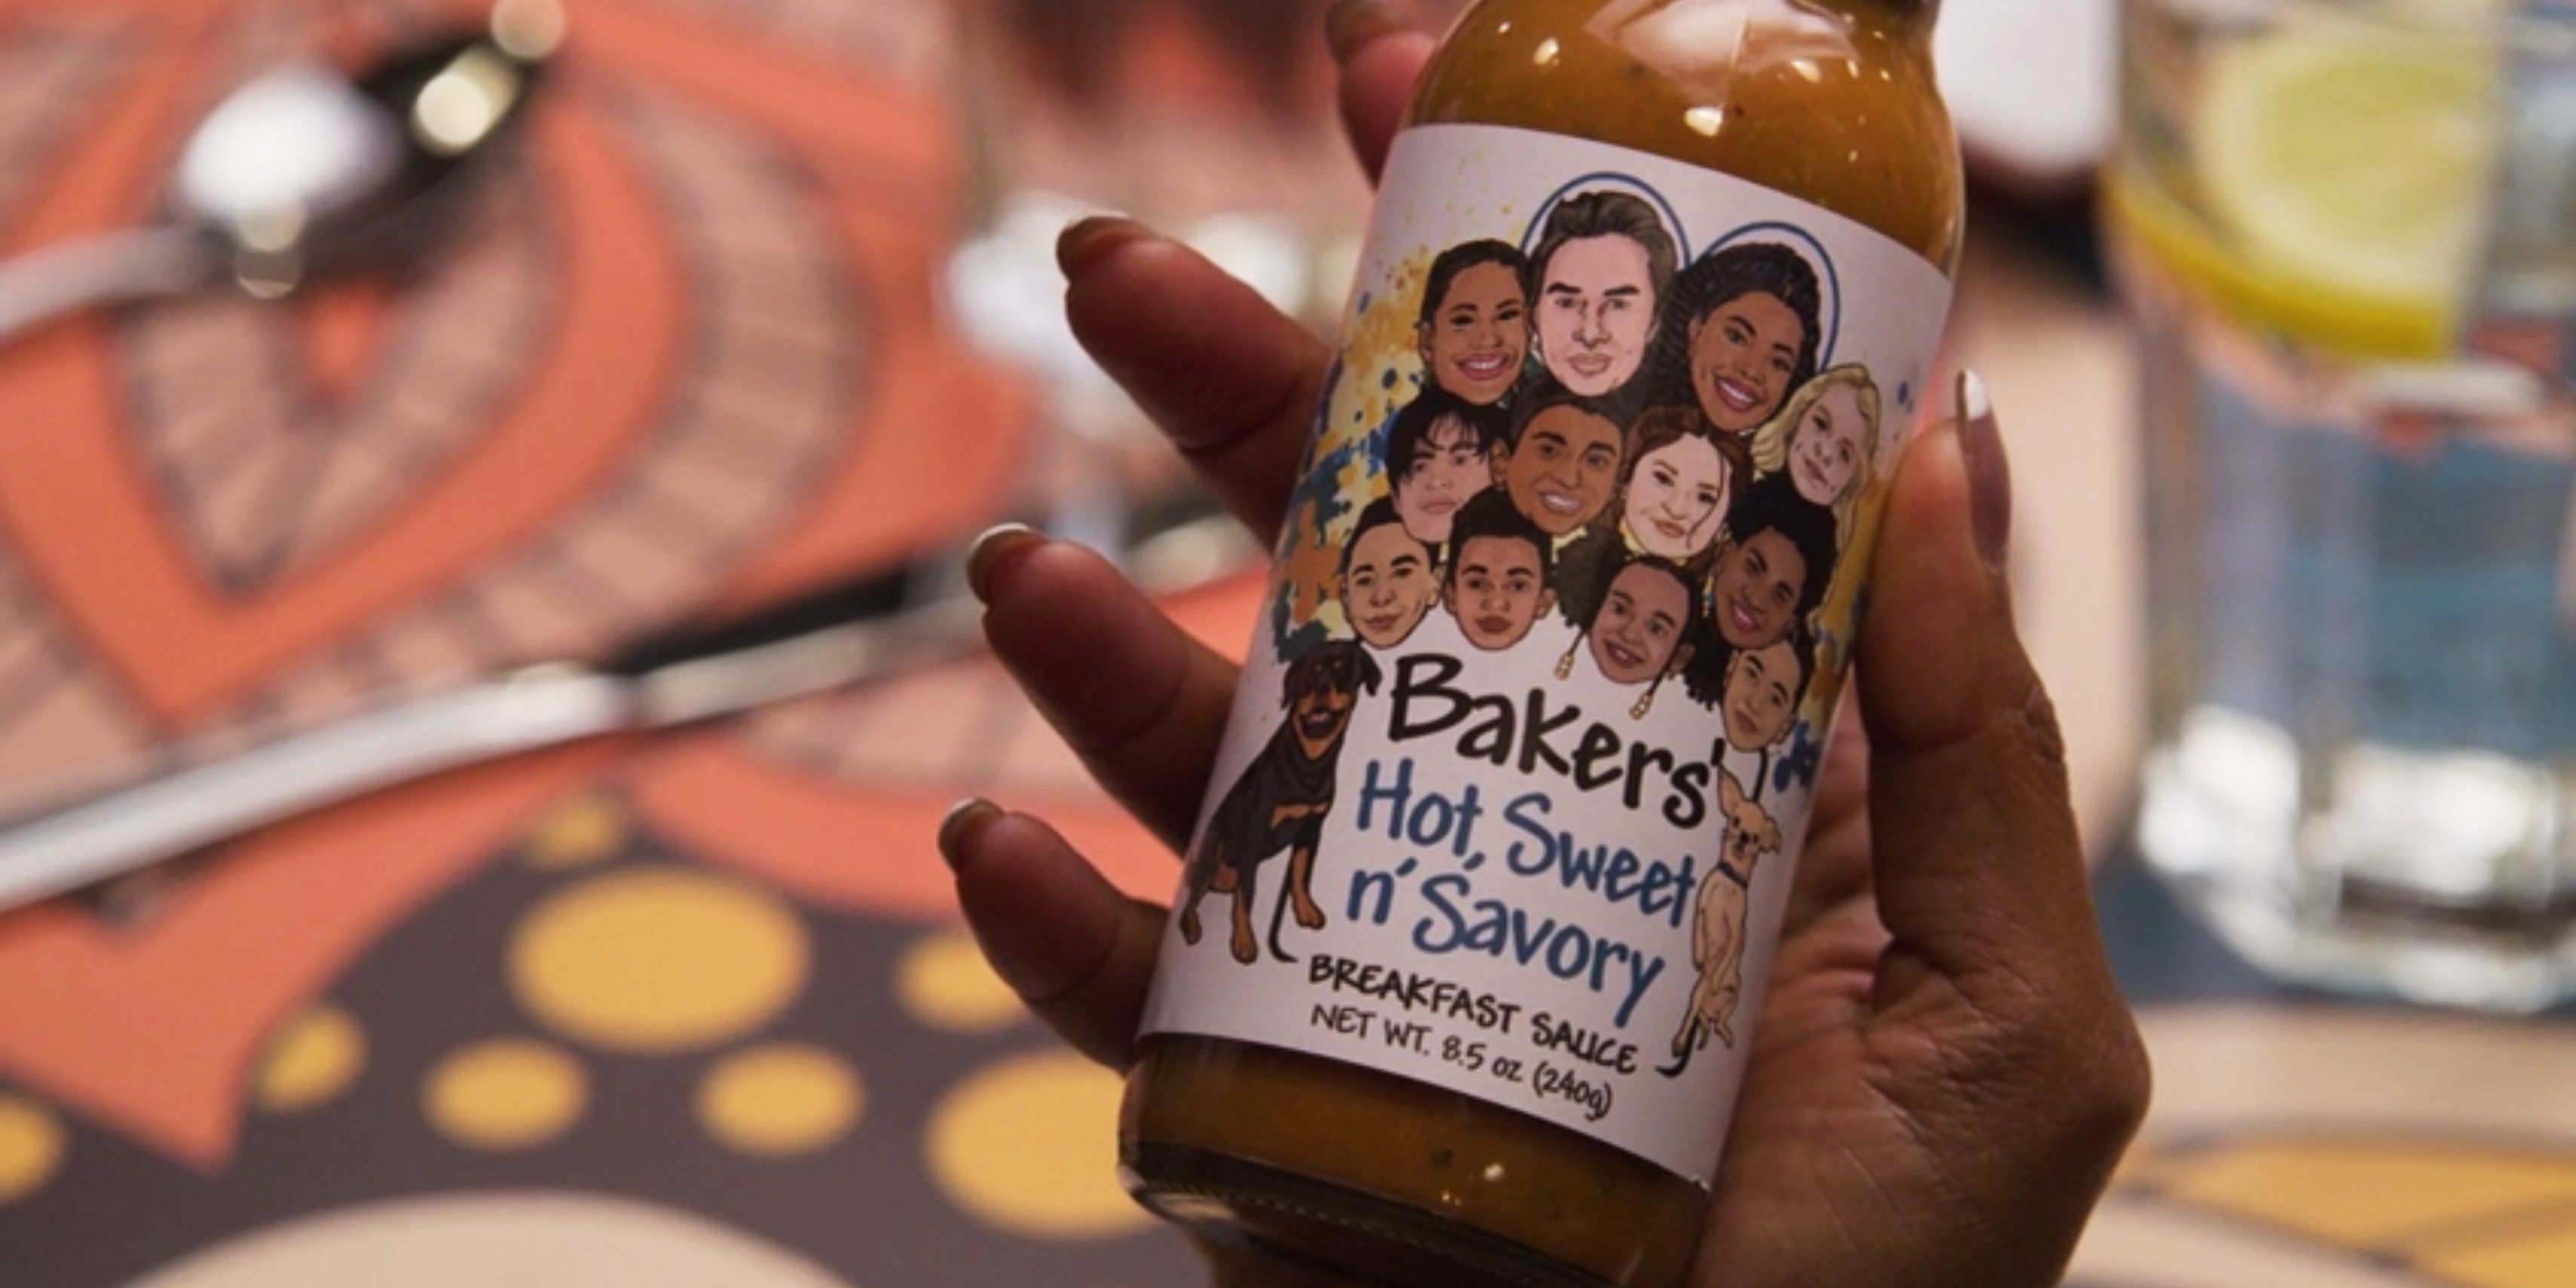 Bakers' Hot, Sweet, and Savory Sauce with art of the whole family on the bottle